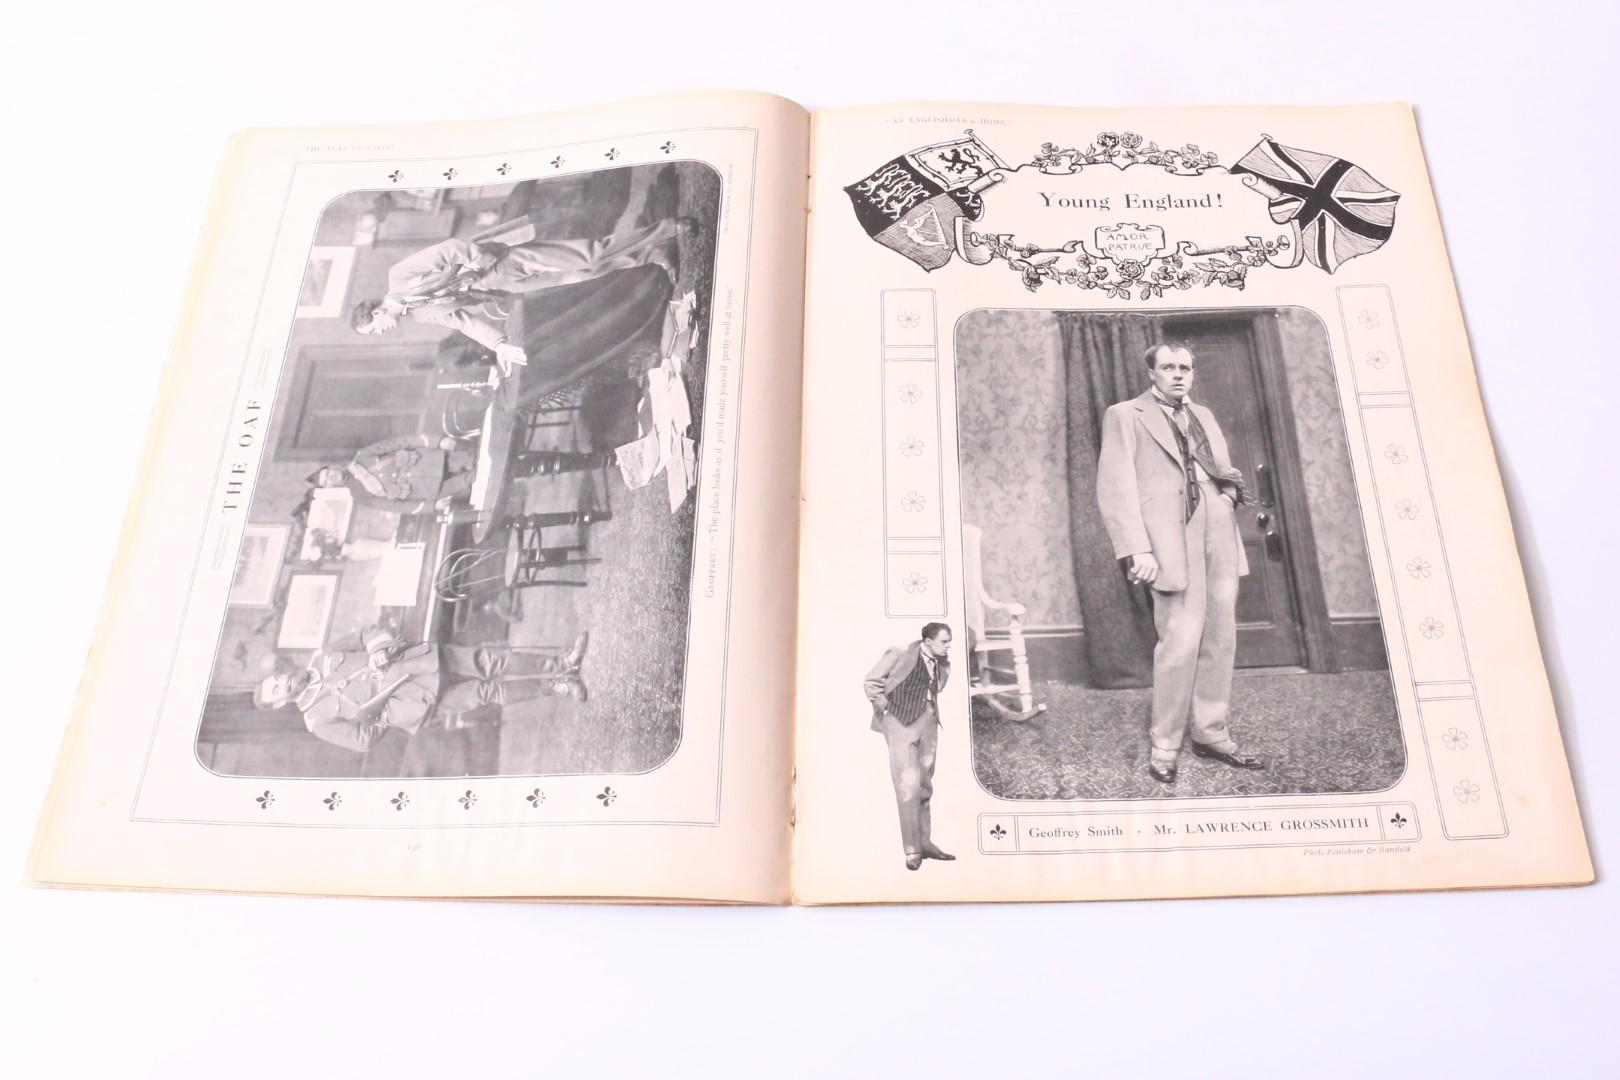 [Guy Du Maurier] - An Englishman's Home [in] The Play Pictorial, 81 vol XIII - The Stage Pictorial Publishing, n.d. [1909?], First Edition.